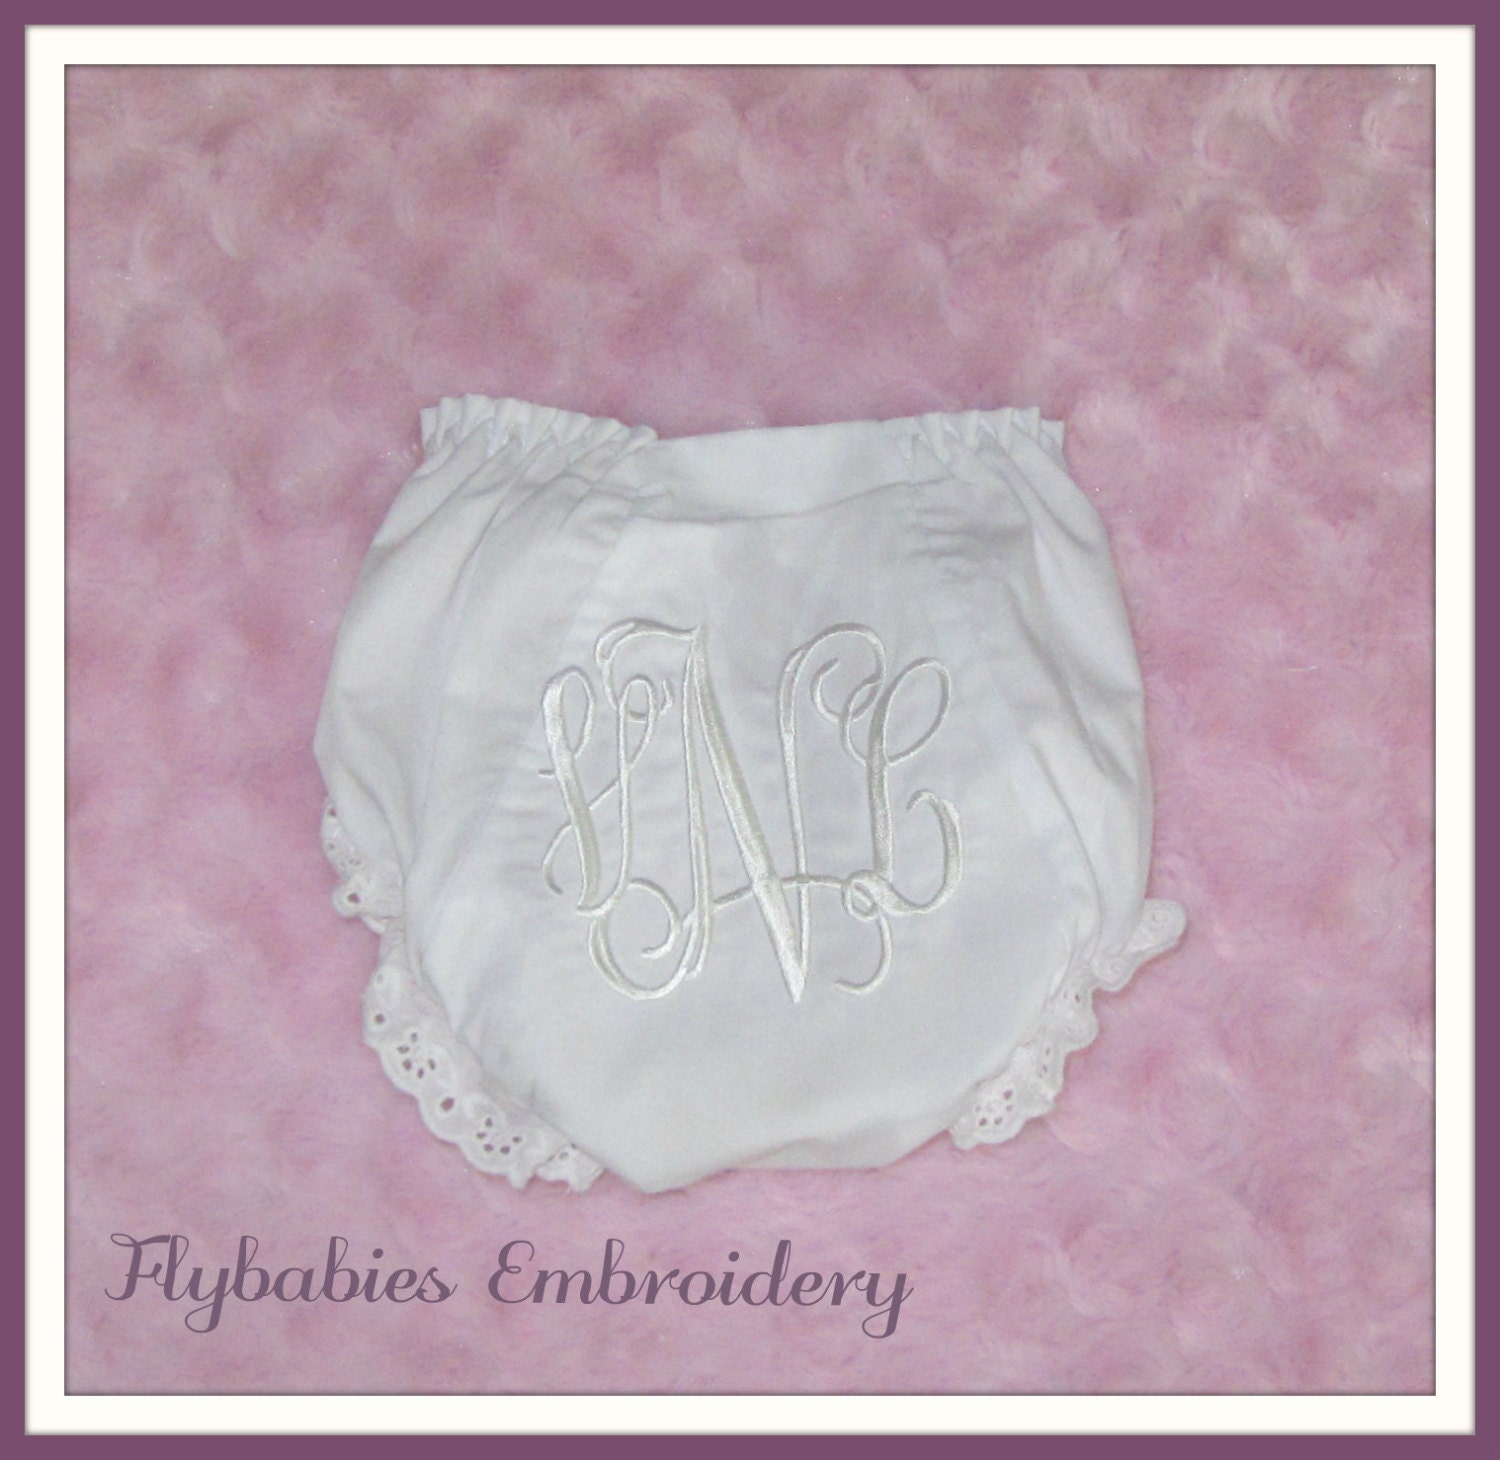 Baby Girls' Bloomers, Diaper Covers, & Underwear 